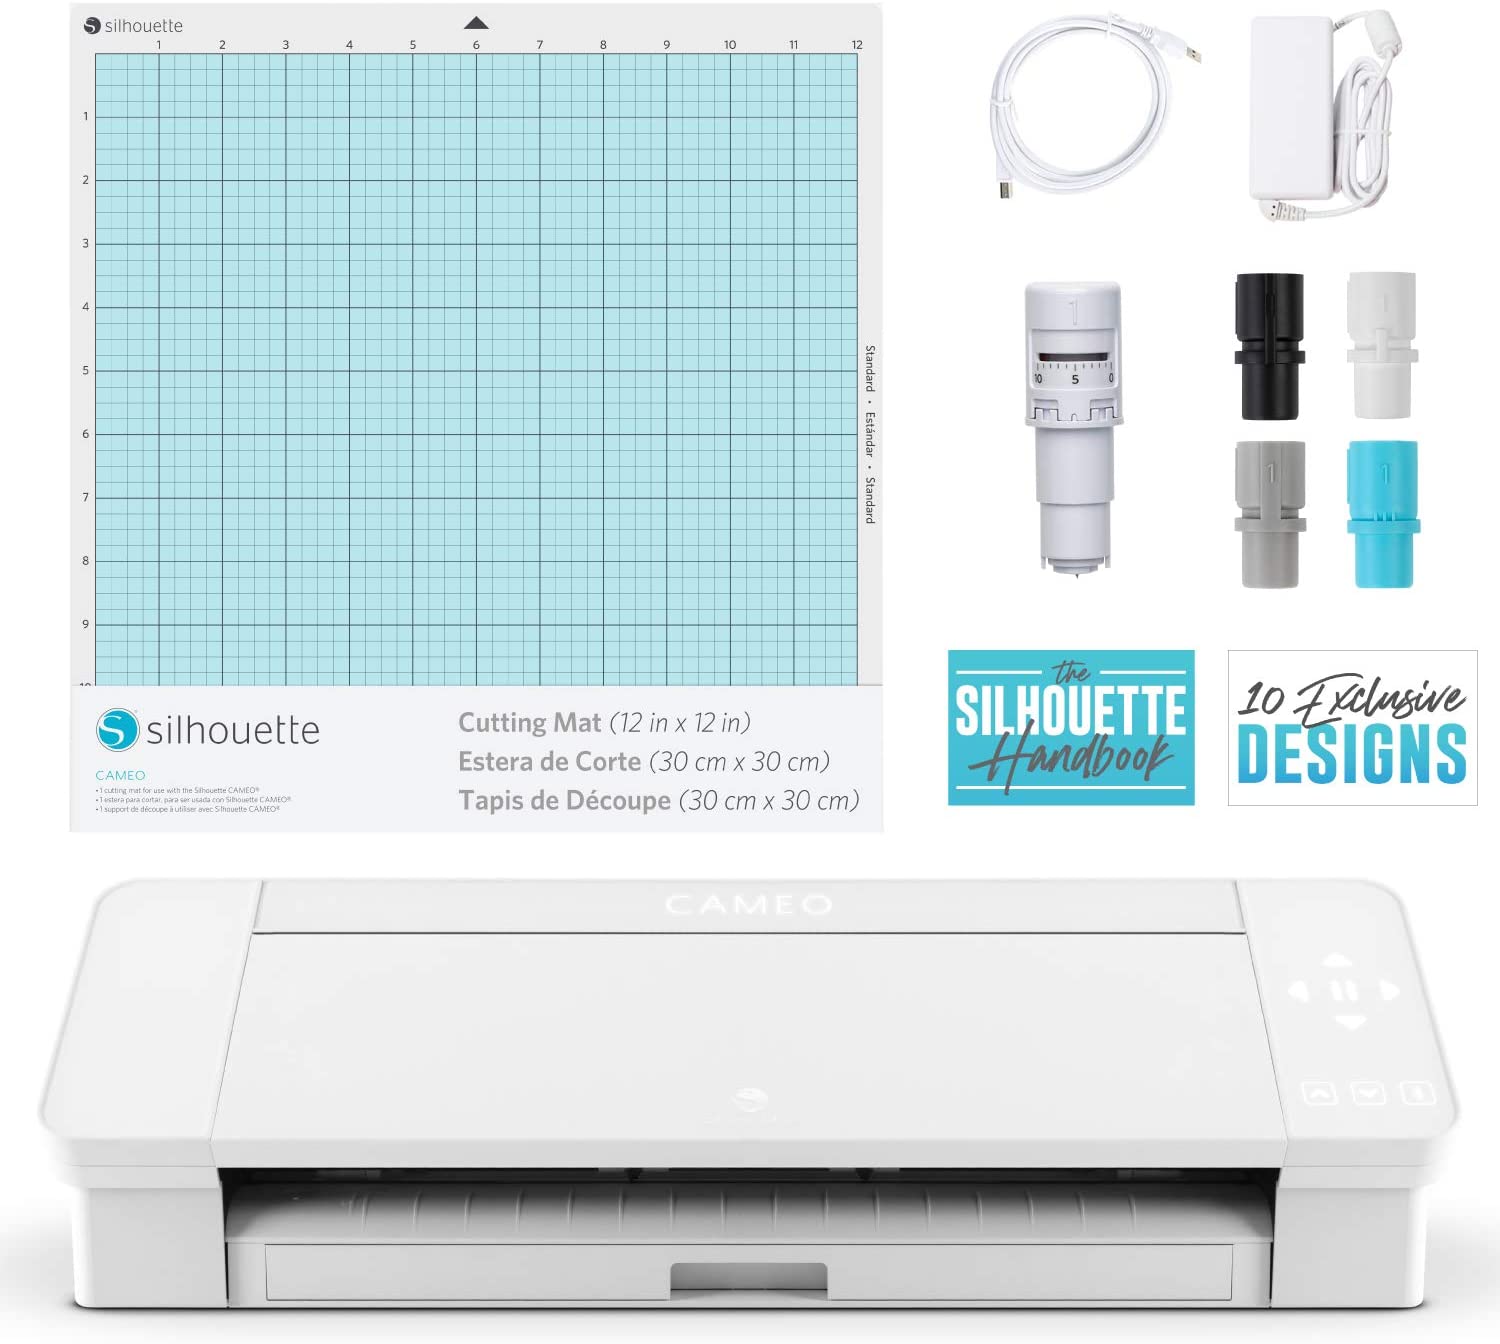 Silhouette Cameo 5 12 inch Vinyl Cutting Machine with Studio Software,  Electric Tool and ES Mat